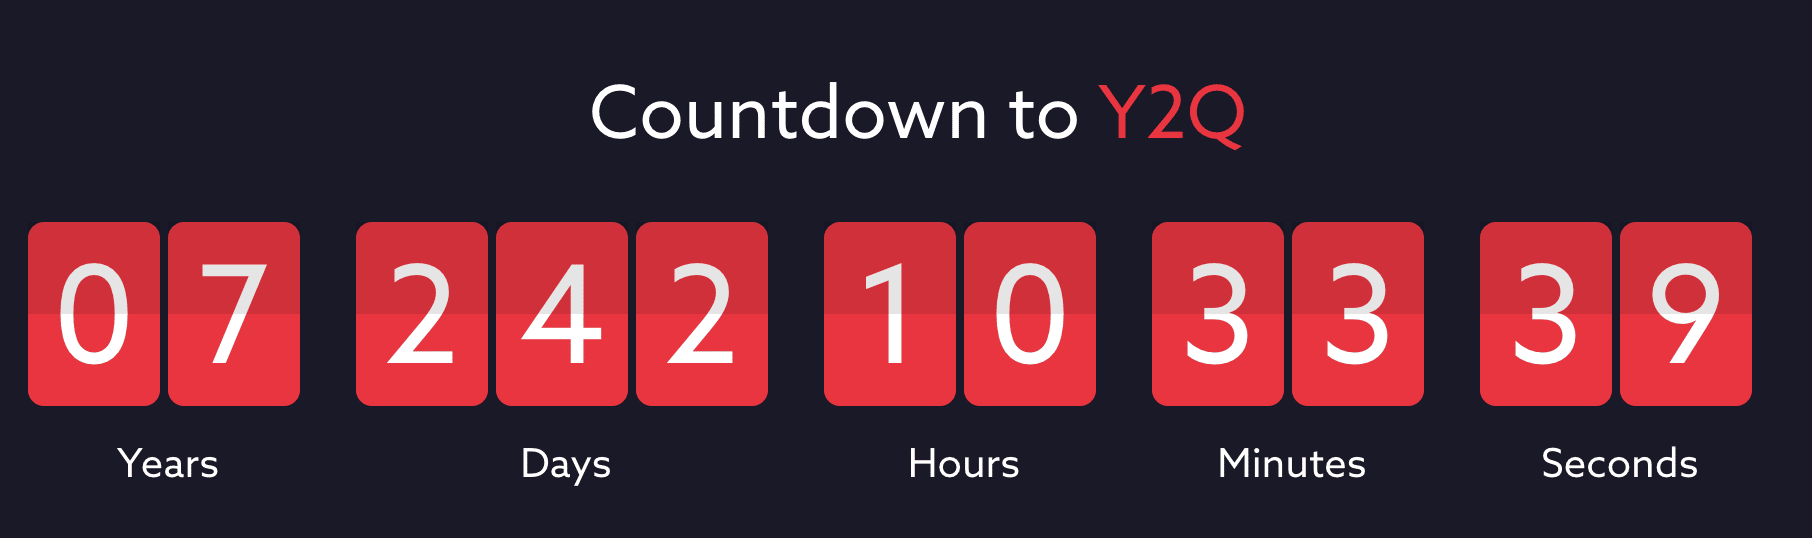 Countdown to Y2Q